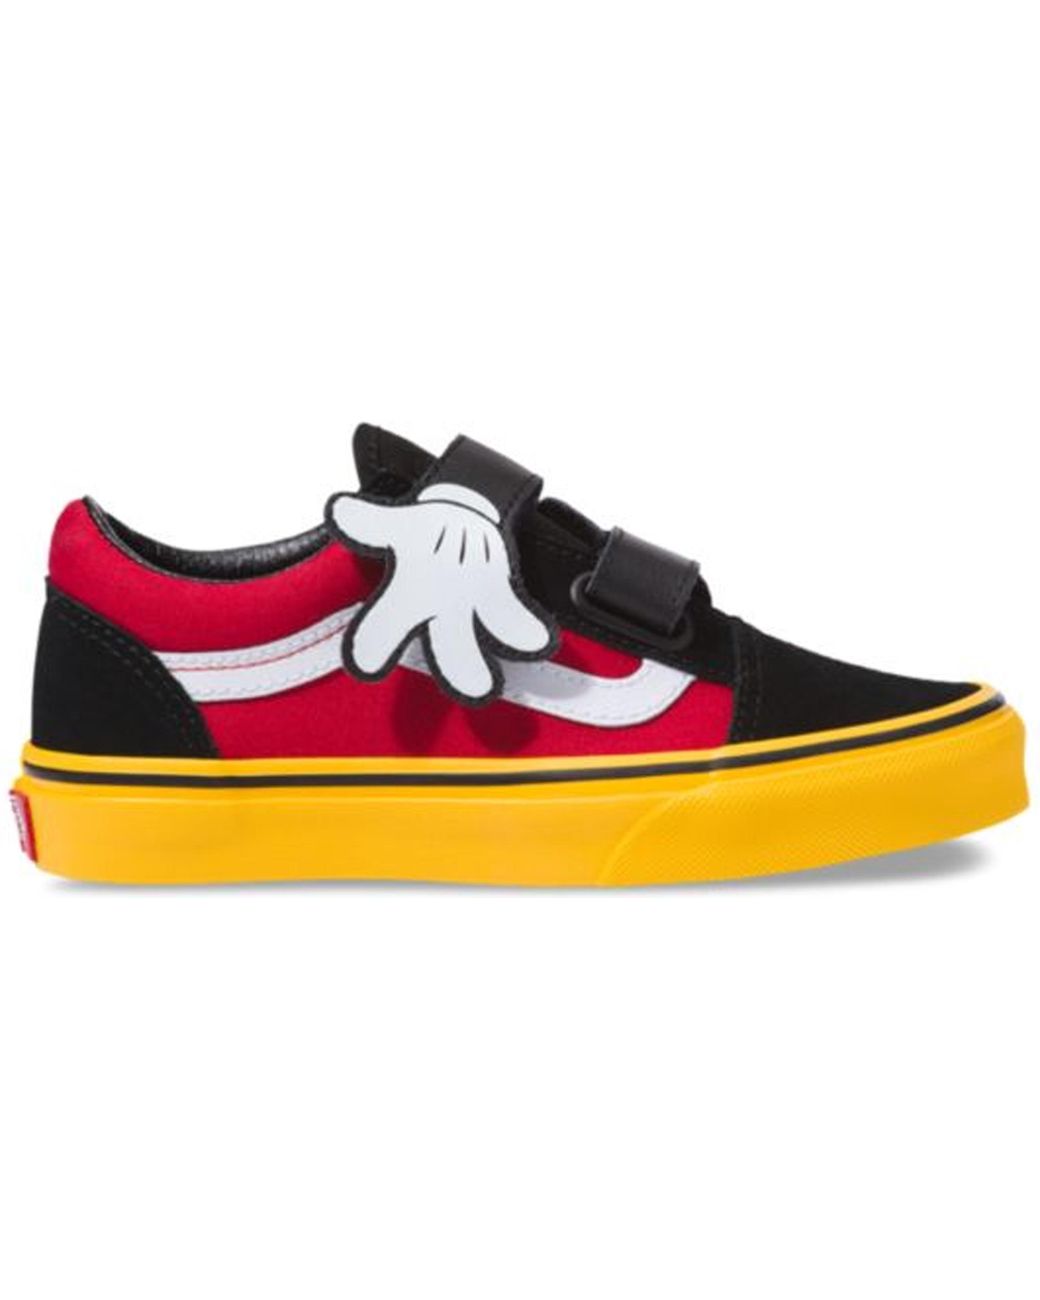 Get - vans old skool v disney mickey mouse hugs - OFF 63% - Getting free  delivery on the things you buy every day - www.armaosgb.com.tr